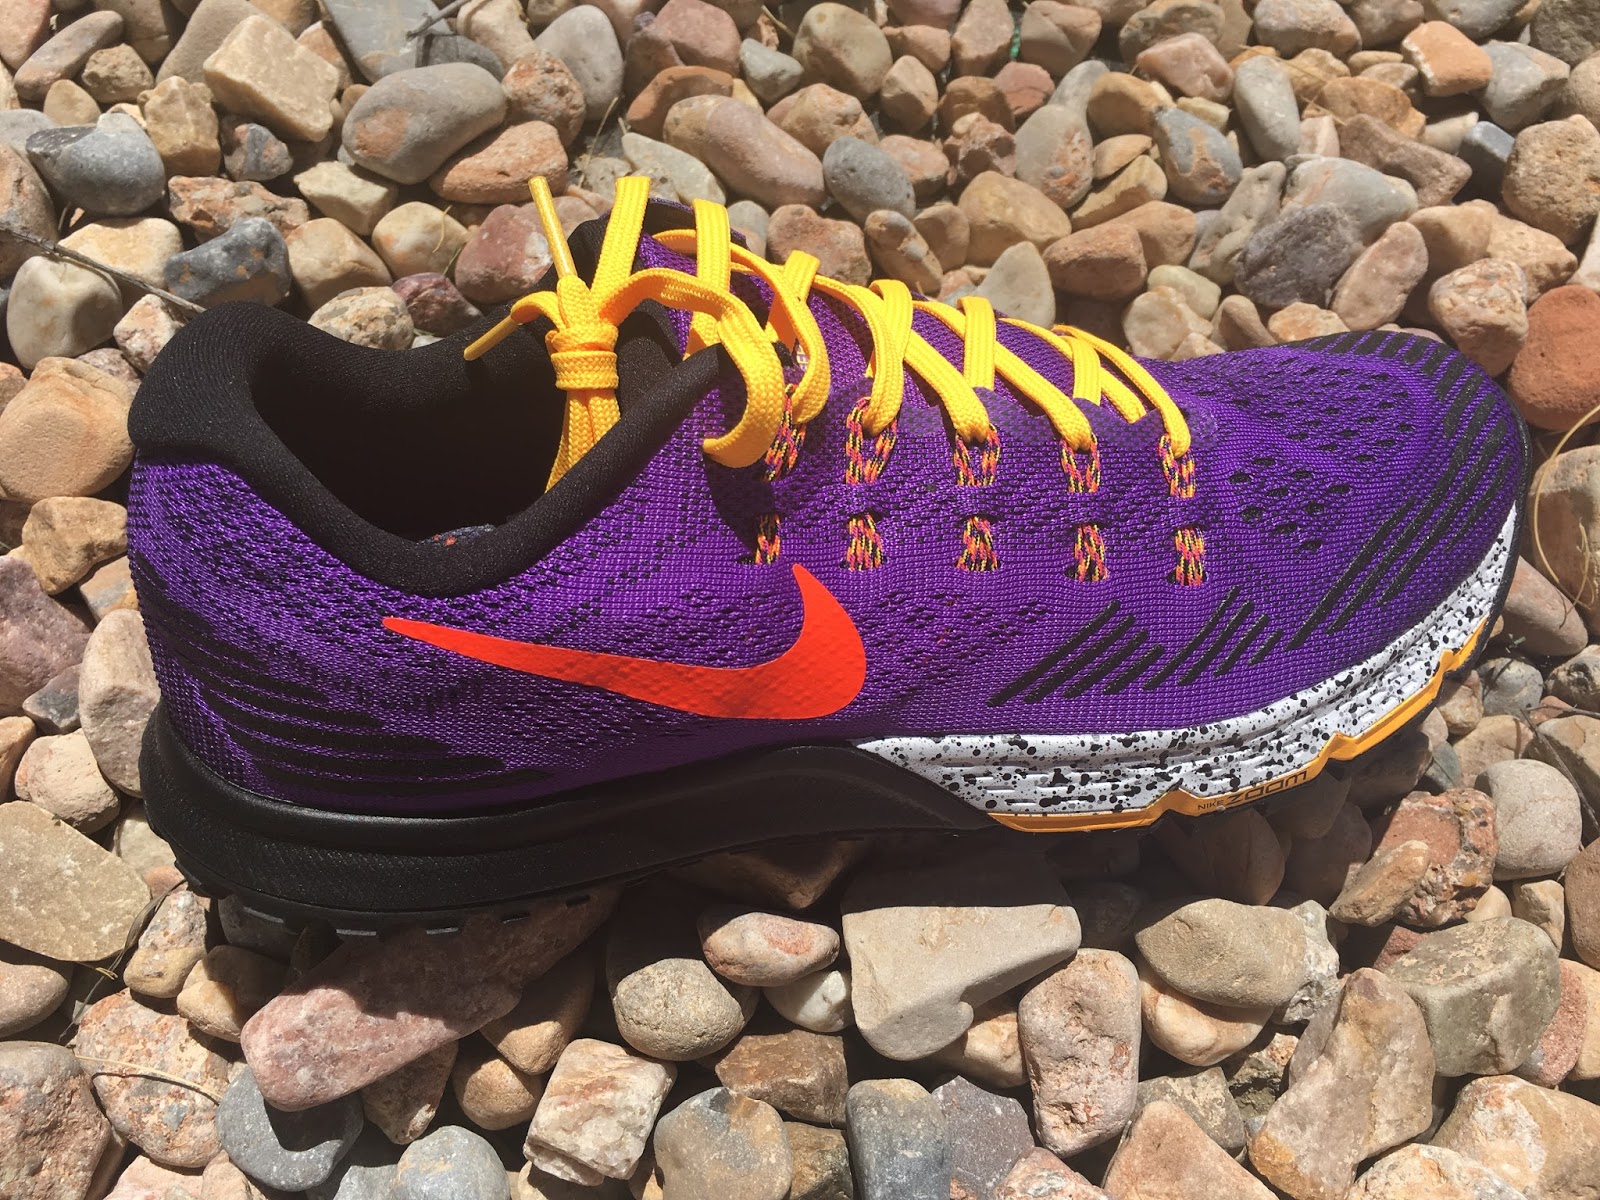 Todo tipo de Melodramático Jane Austen Road Trail Run: Review Nike Zoom Terra Kiger 3: Light, Supportive, Ground  and Foot Conforming